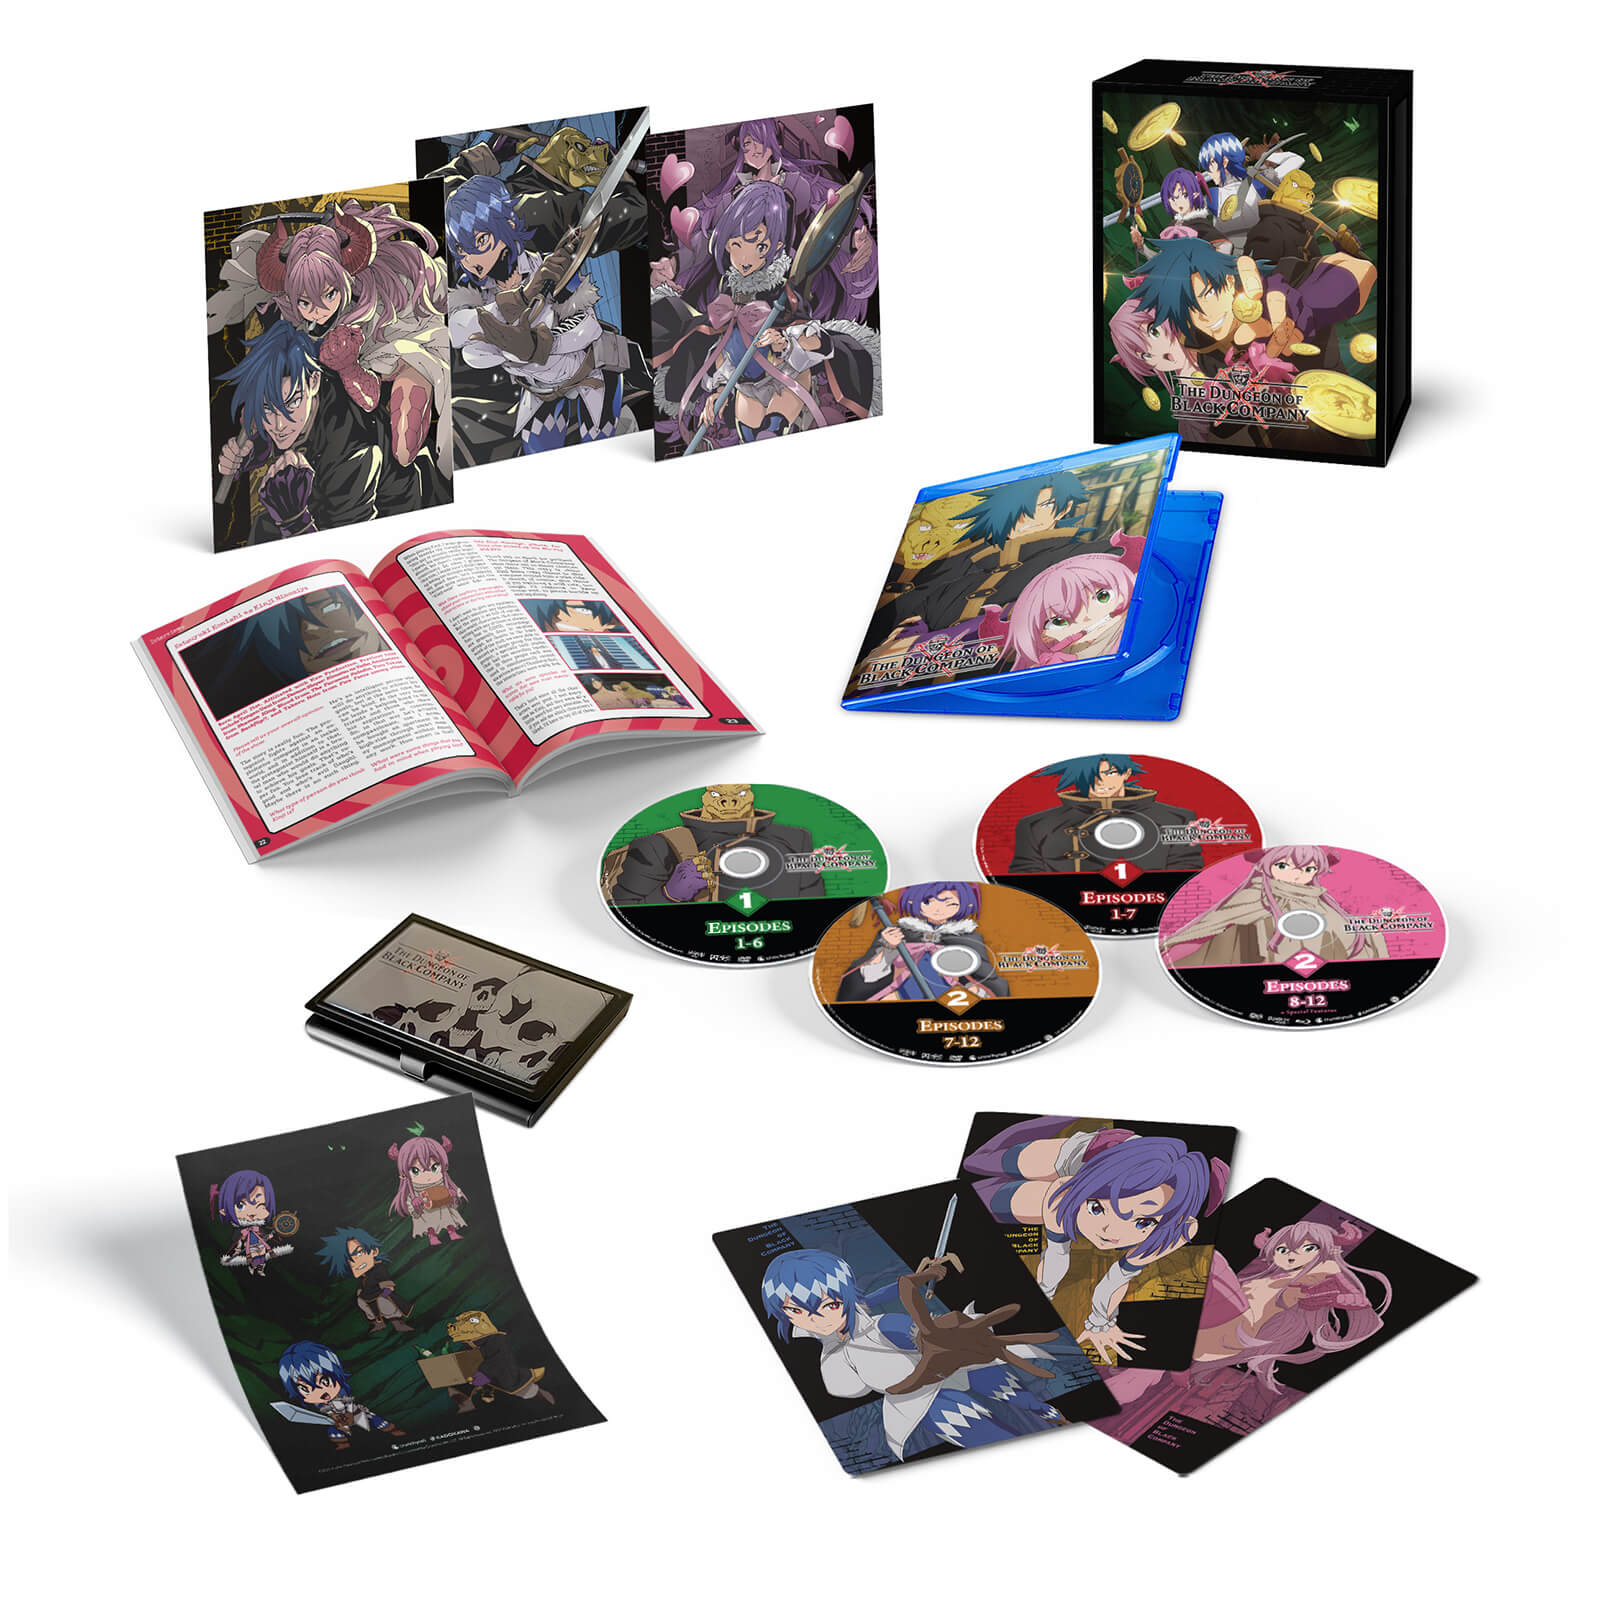 The Dungeon of Black Company - The Complete Season Limited Edition von Crunchyroll